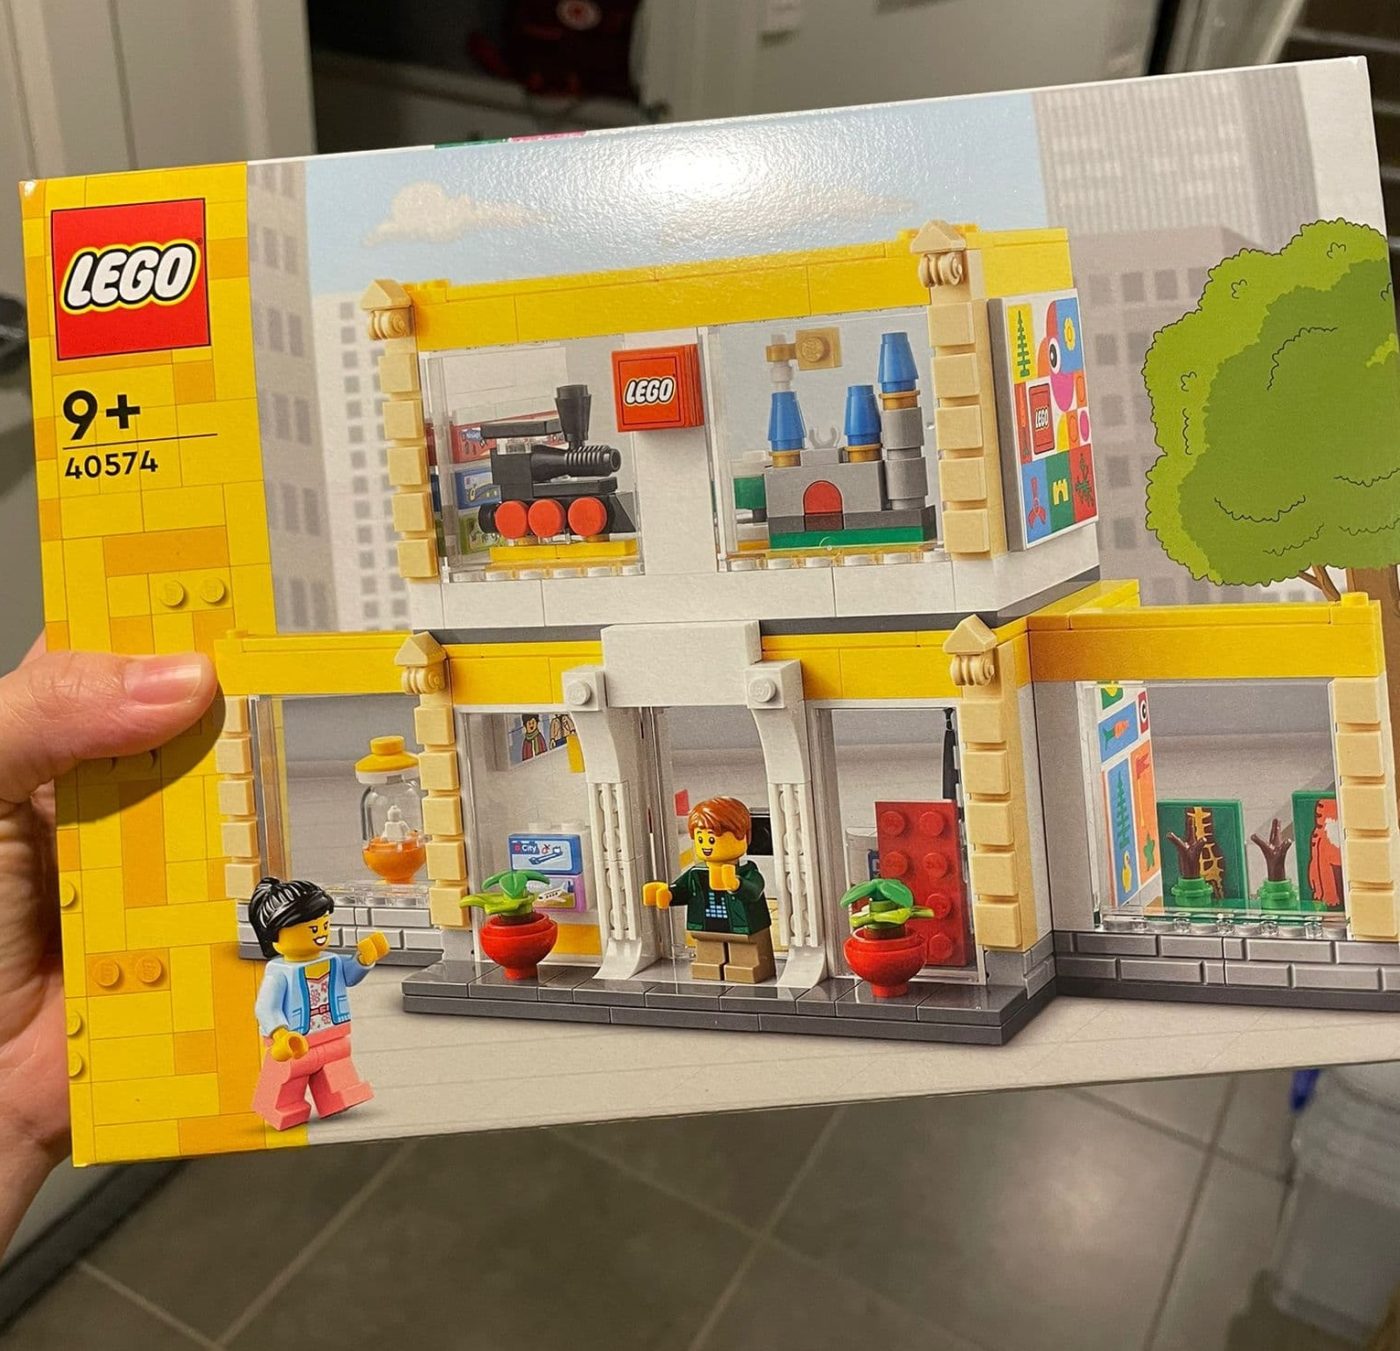 40574 LEGO Brand Store is a newly updated LEGO store for 2022 that everyone can - Brick Blog